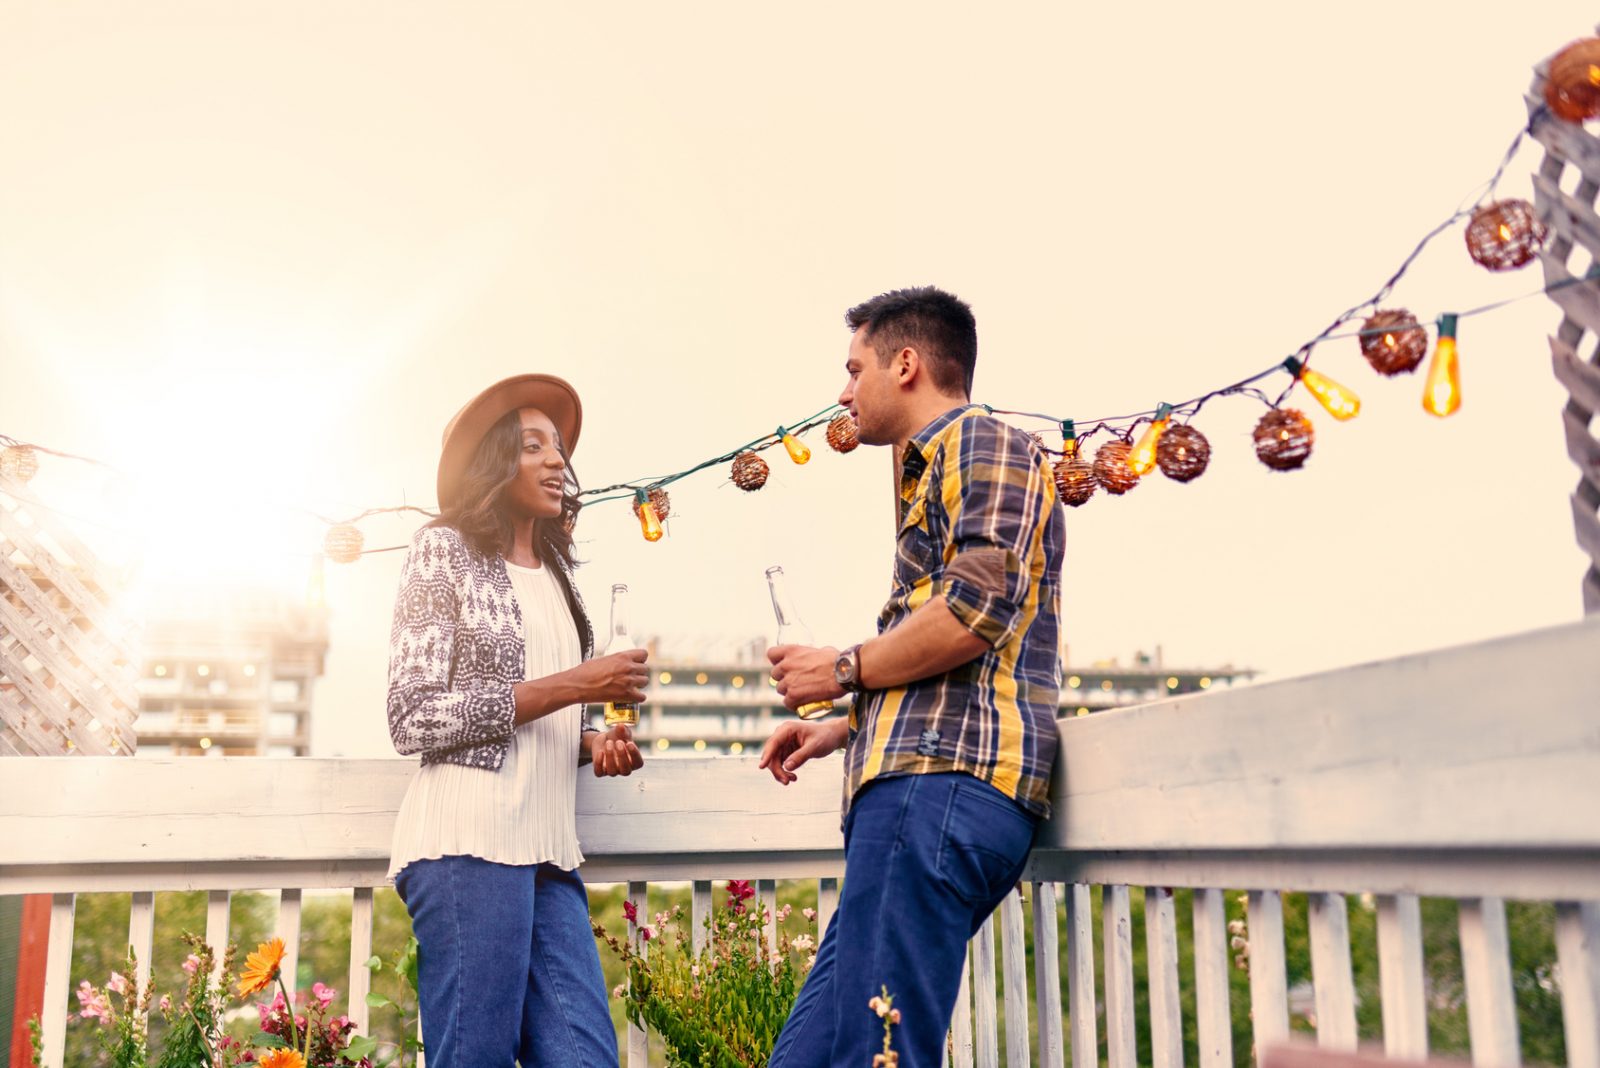 Are You Too Emotional? This Quiz Will Reveal the Truth Multi ethnic millenial couple flirting while having a drink on rooftop terrasse at sunset